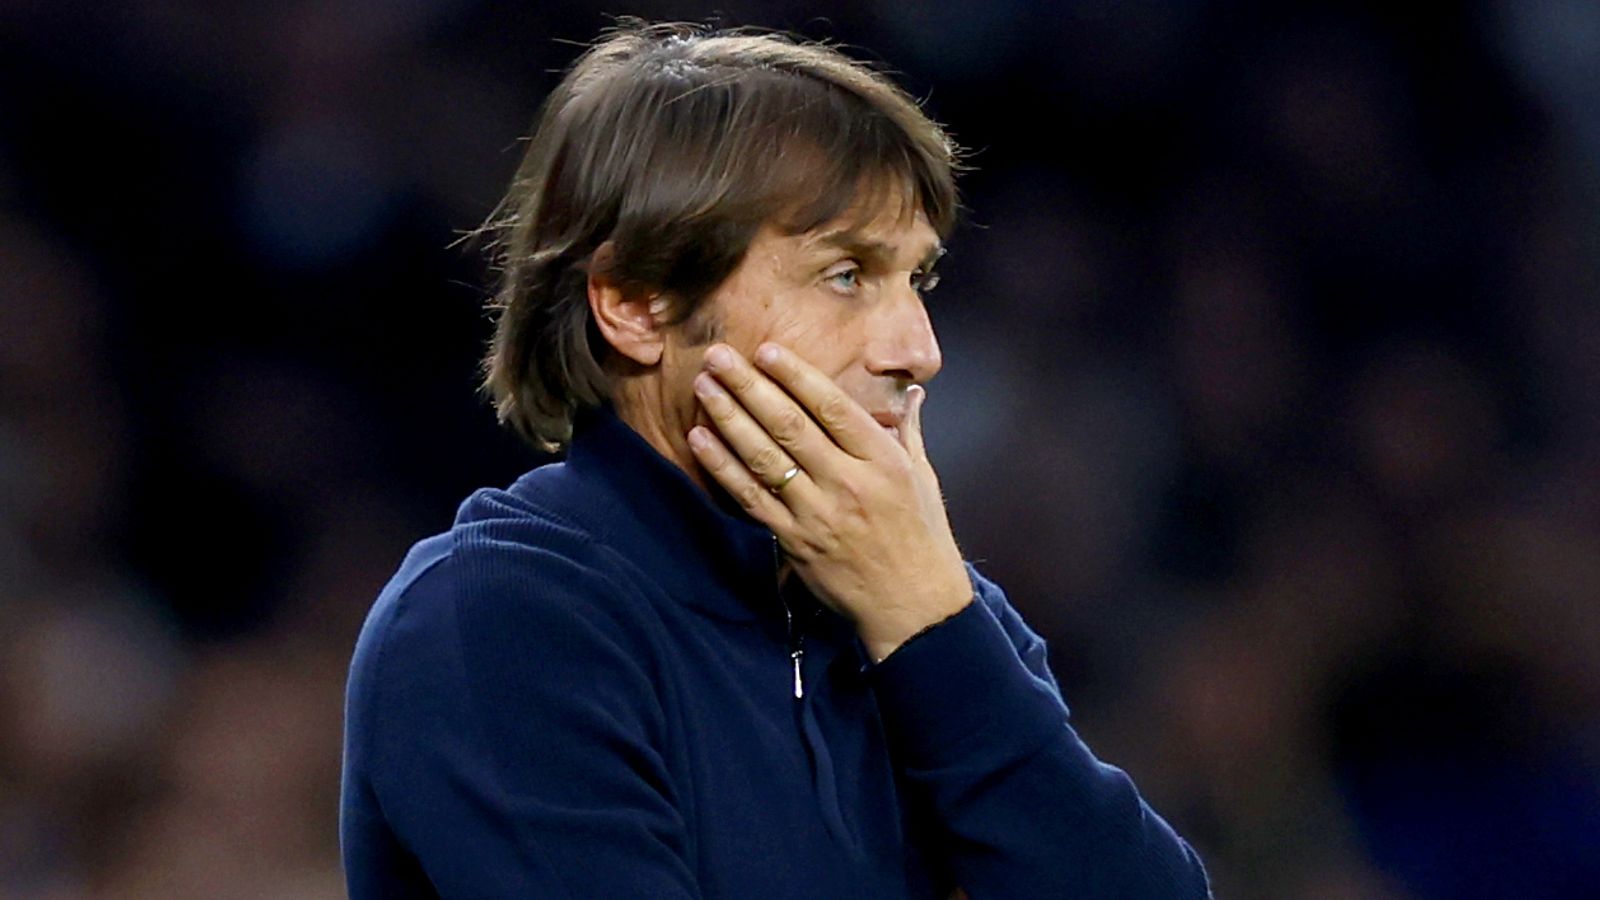 antonio-conte-tottenham-boss-stands-by-var-comments-and-believes-it-s-impossible-to-make-mistakes